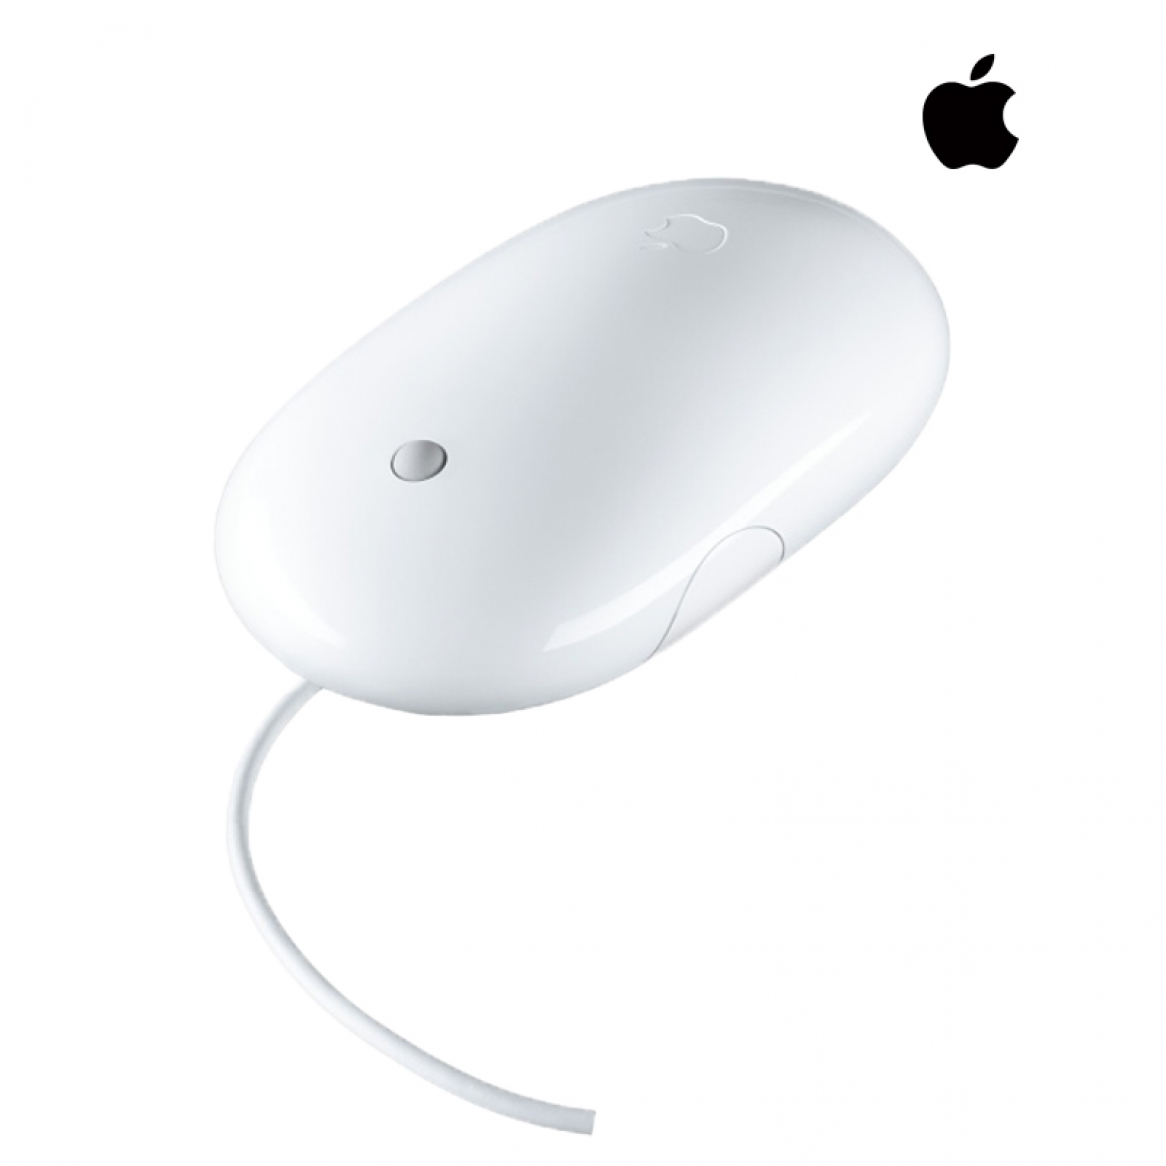 Mac Wired Mouse